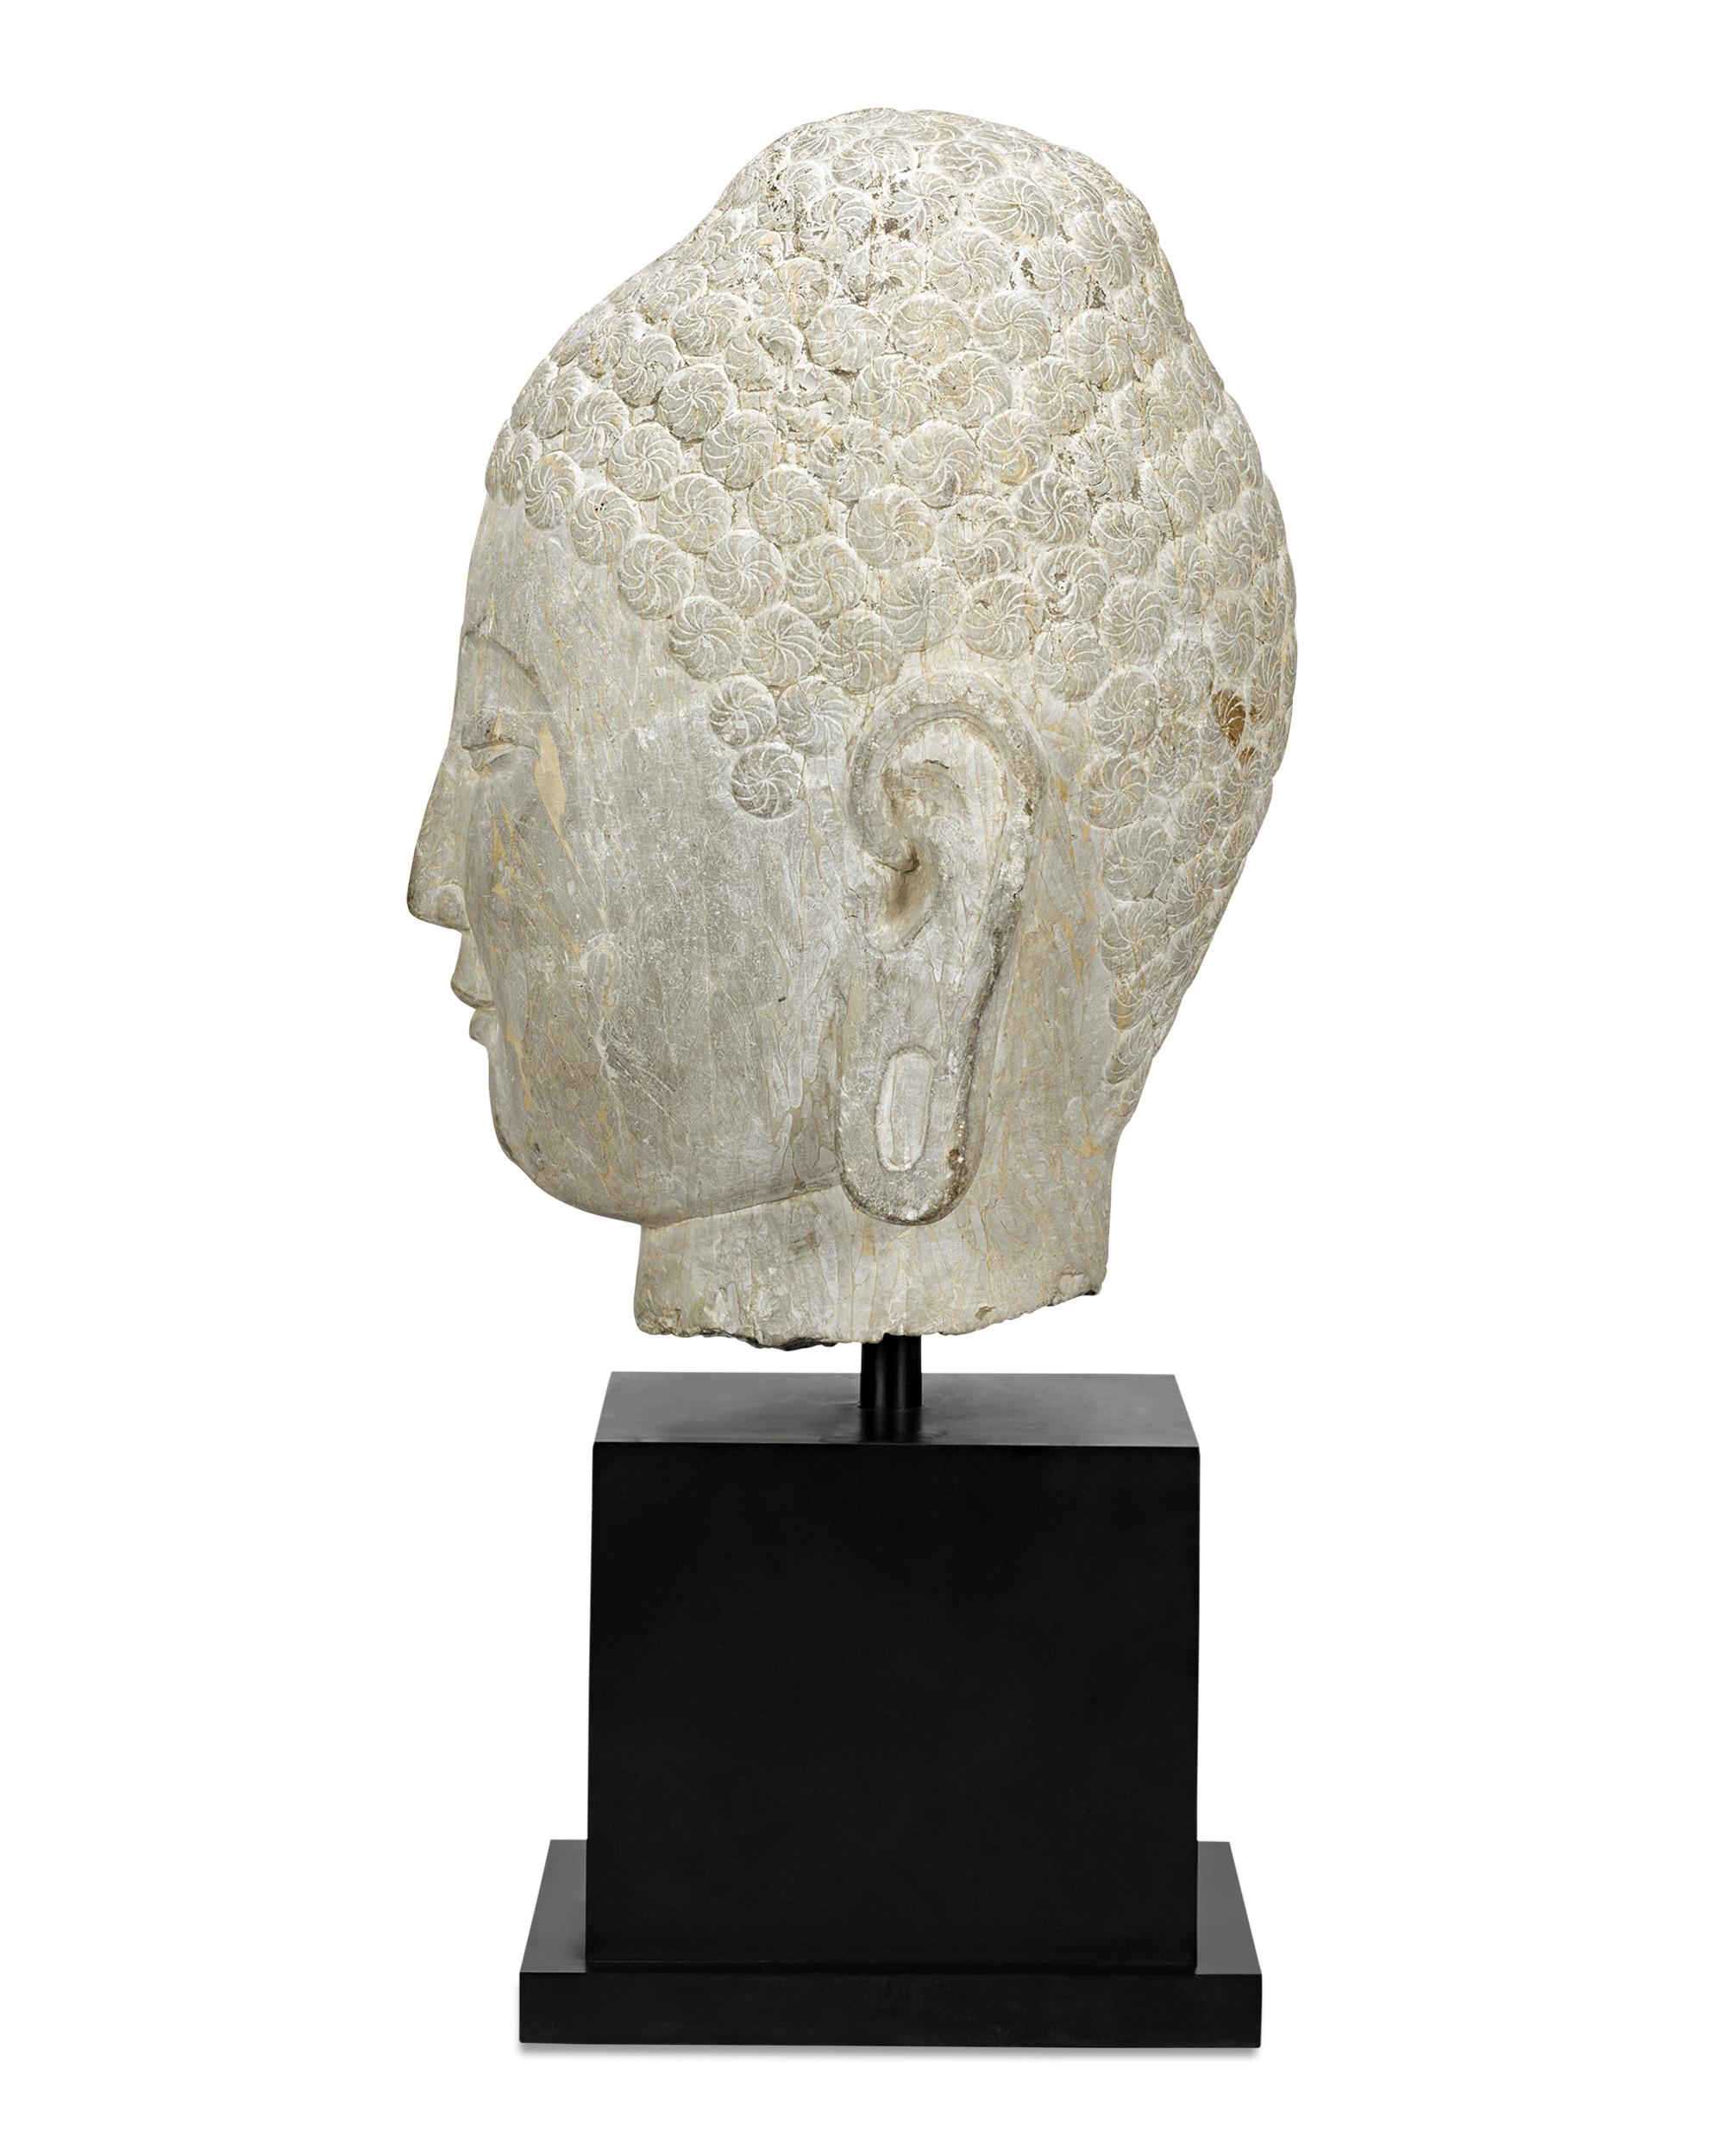 This limestone bust of the Buddha presents a picture of serenity and grace. A rare and striking image, it was sculpted in 6th-century Northern China during the Qi dynasty, one of the most innovative and distinctive periods for the art of stone